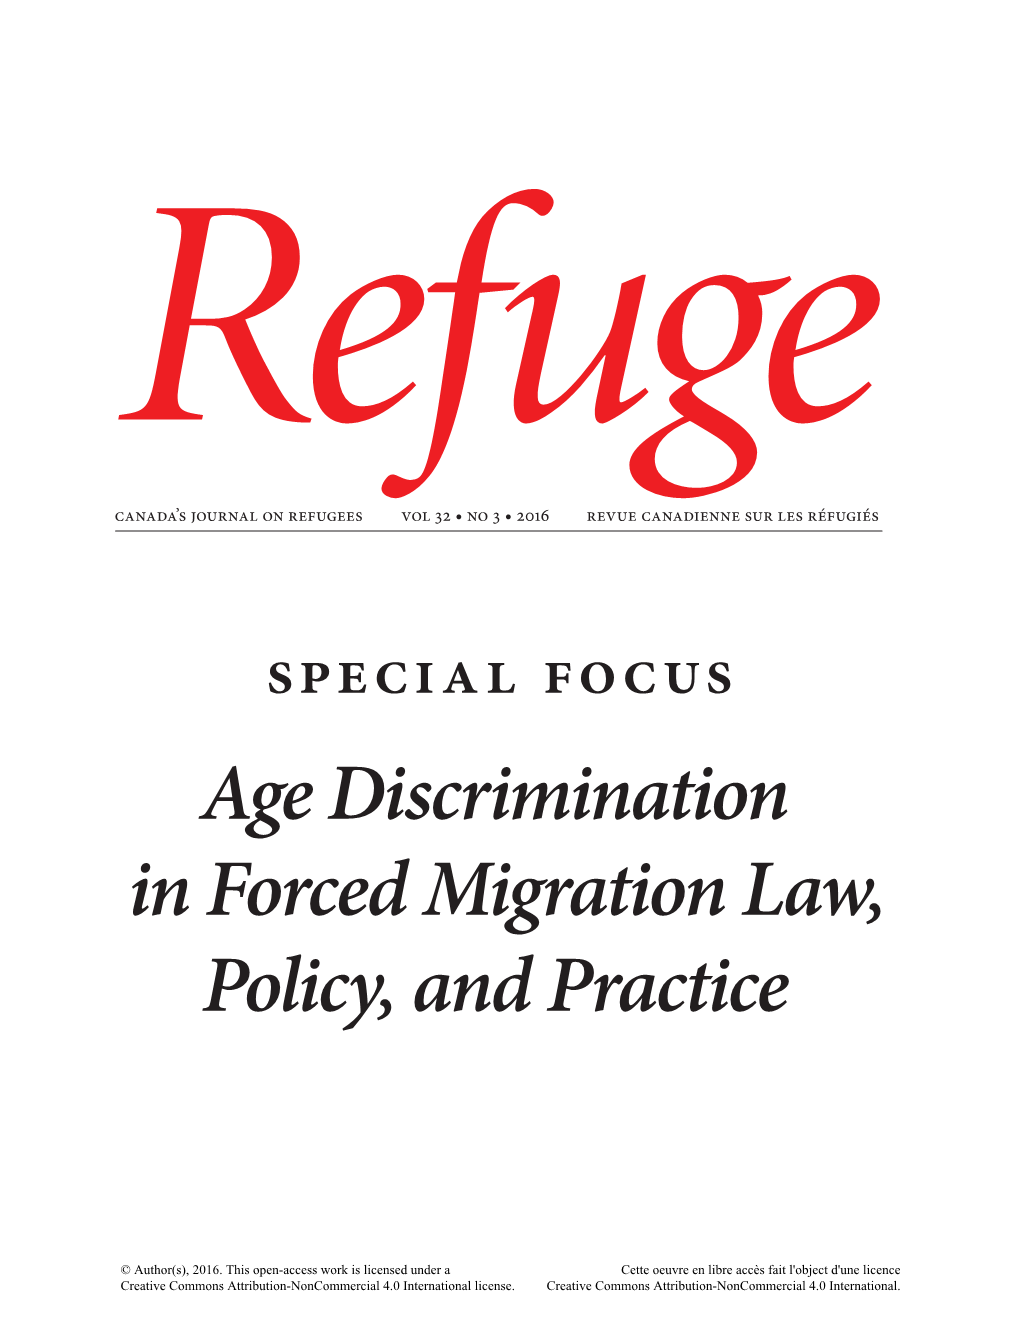 Special Focus Age Discrimination in Forced Migration Law, Policy, and Practice Refuge